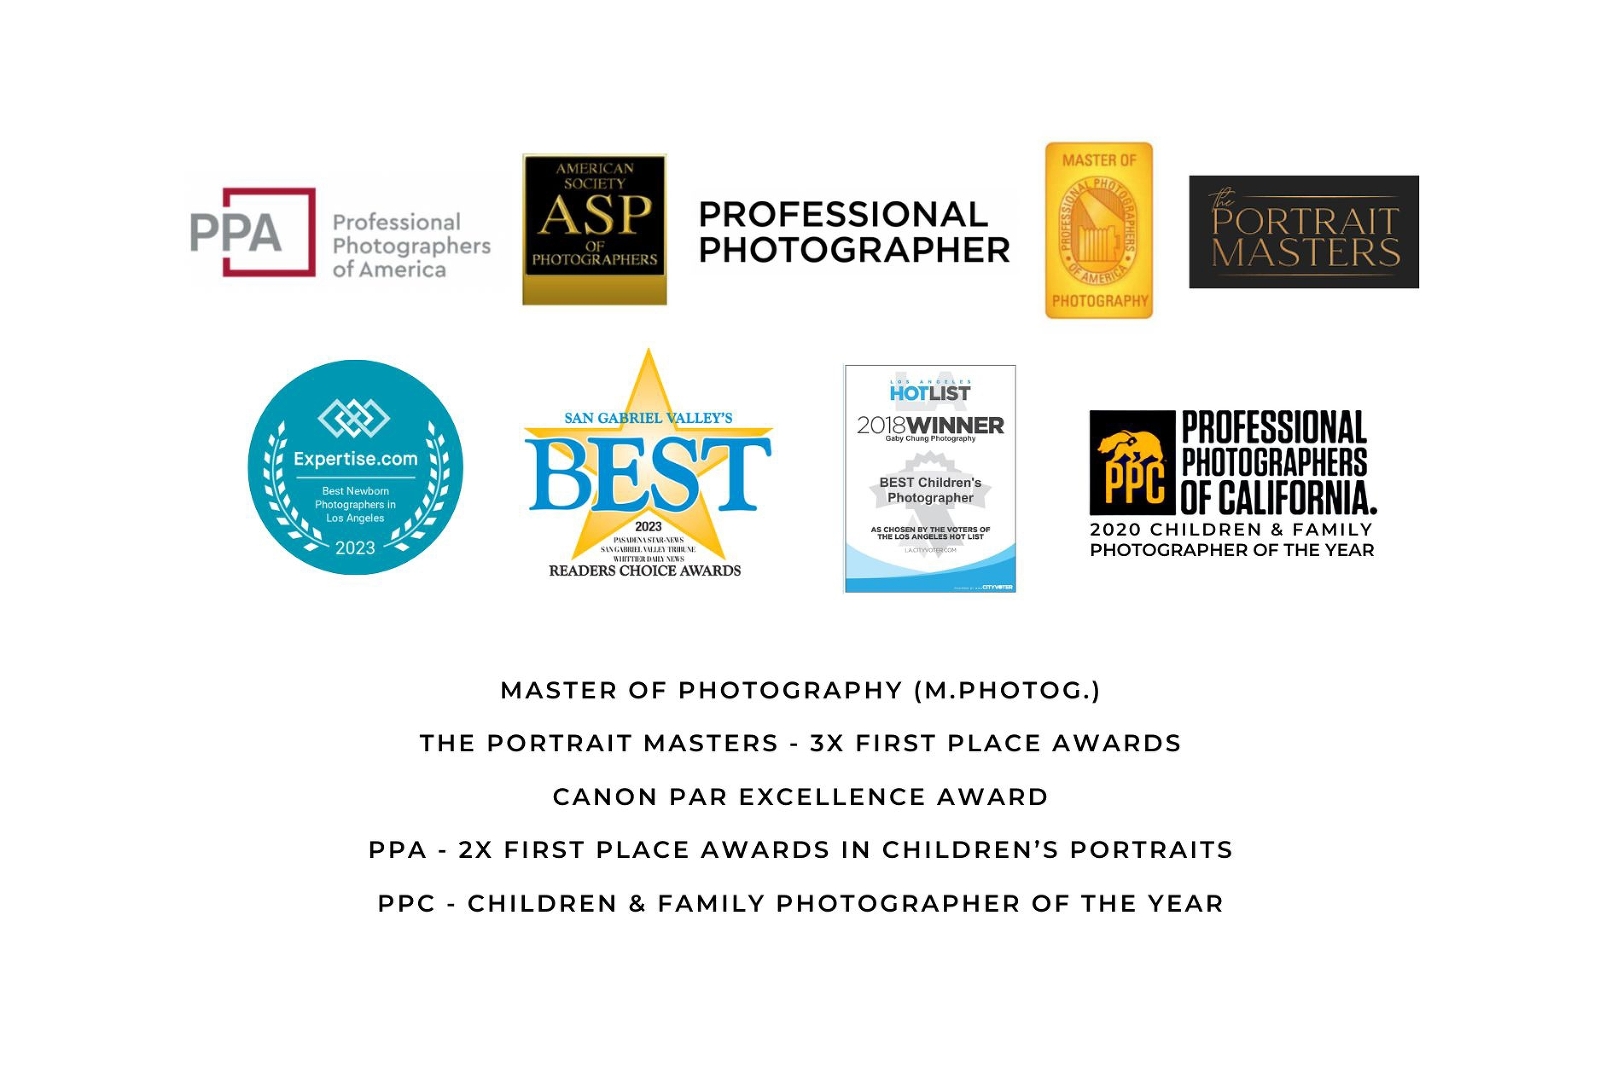 Awards and press for los Angeles newborn photographer